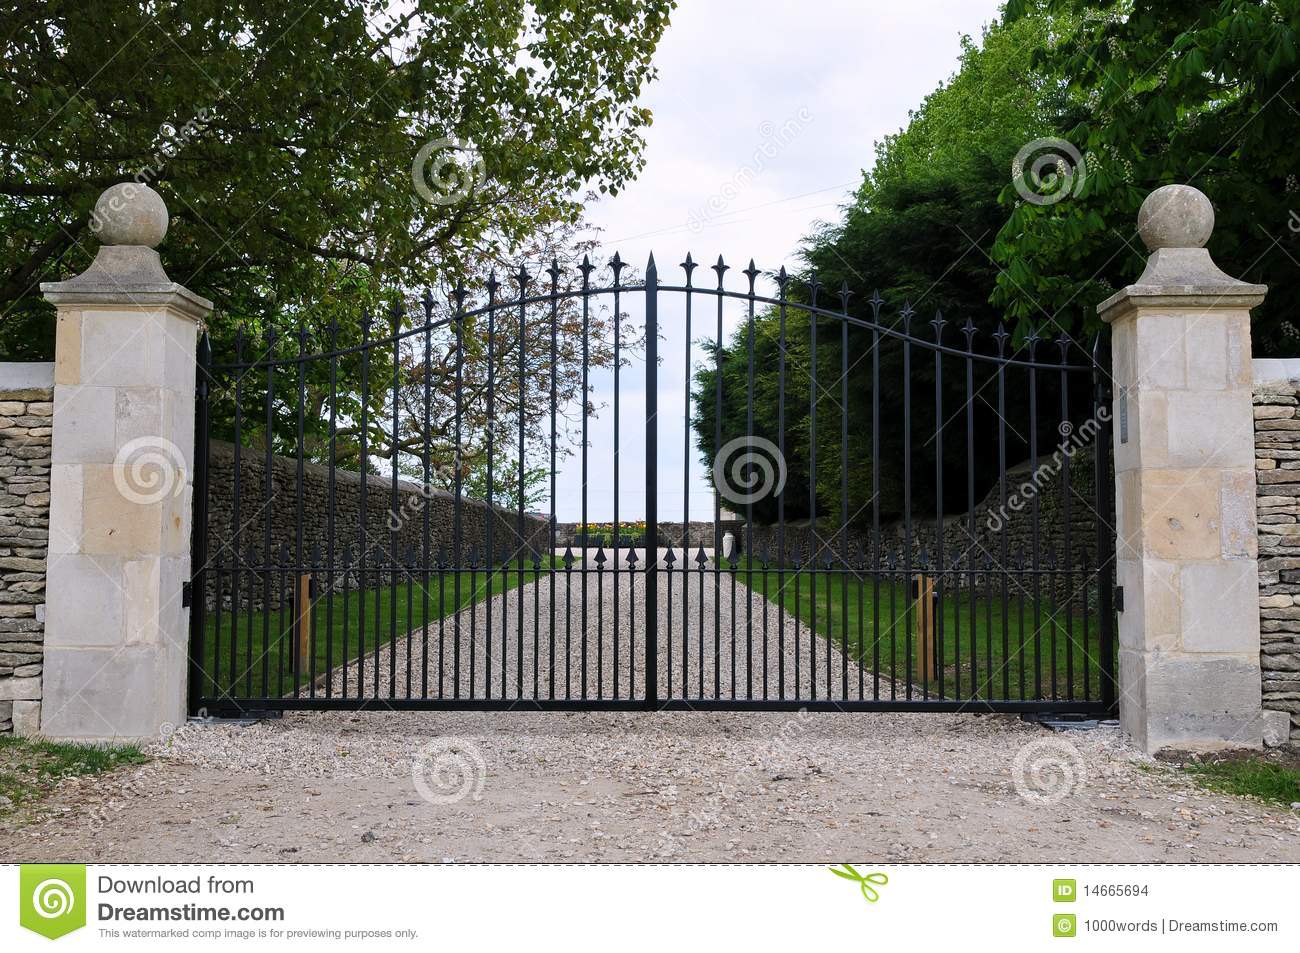 Gates Of A Country Estate Stock Images   Image  14665694